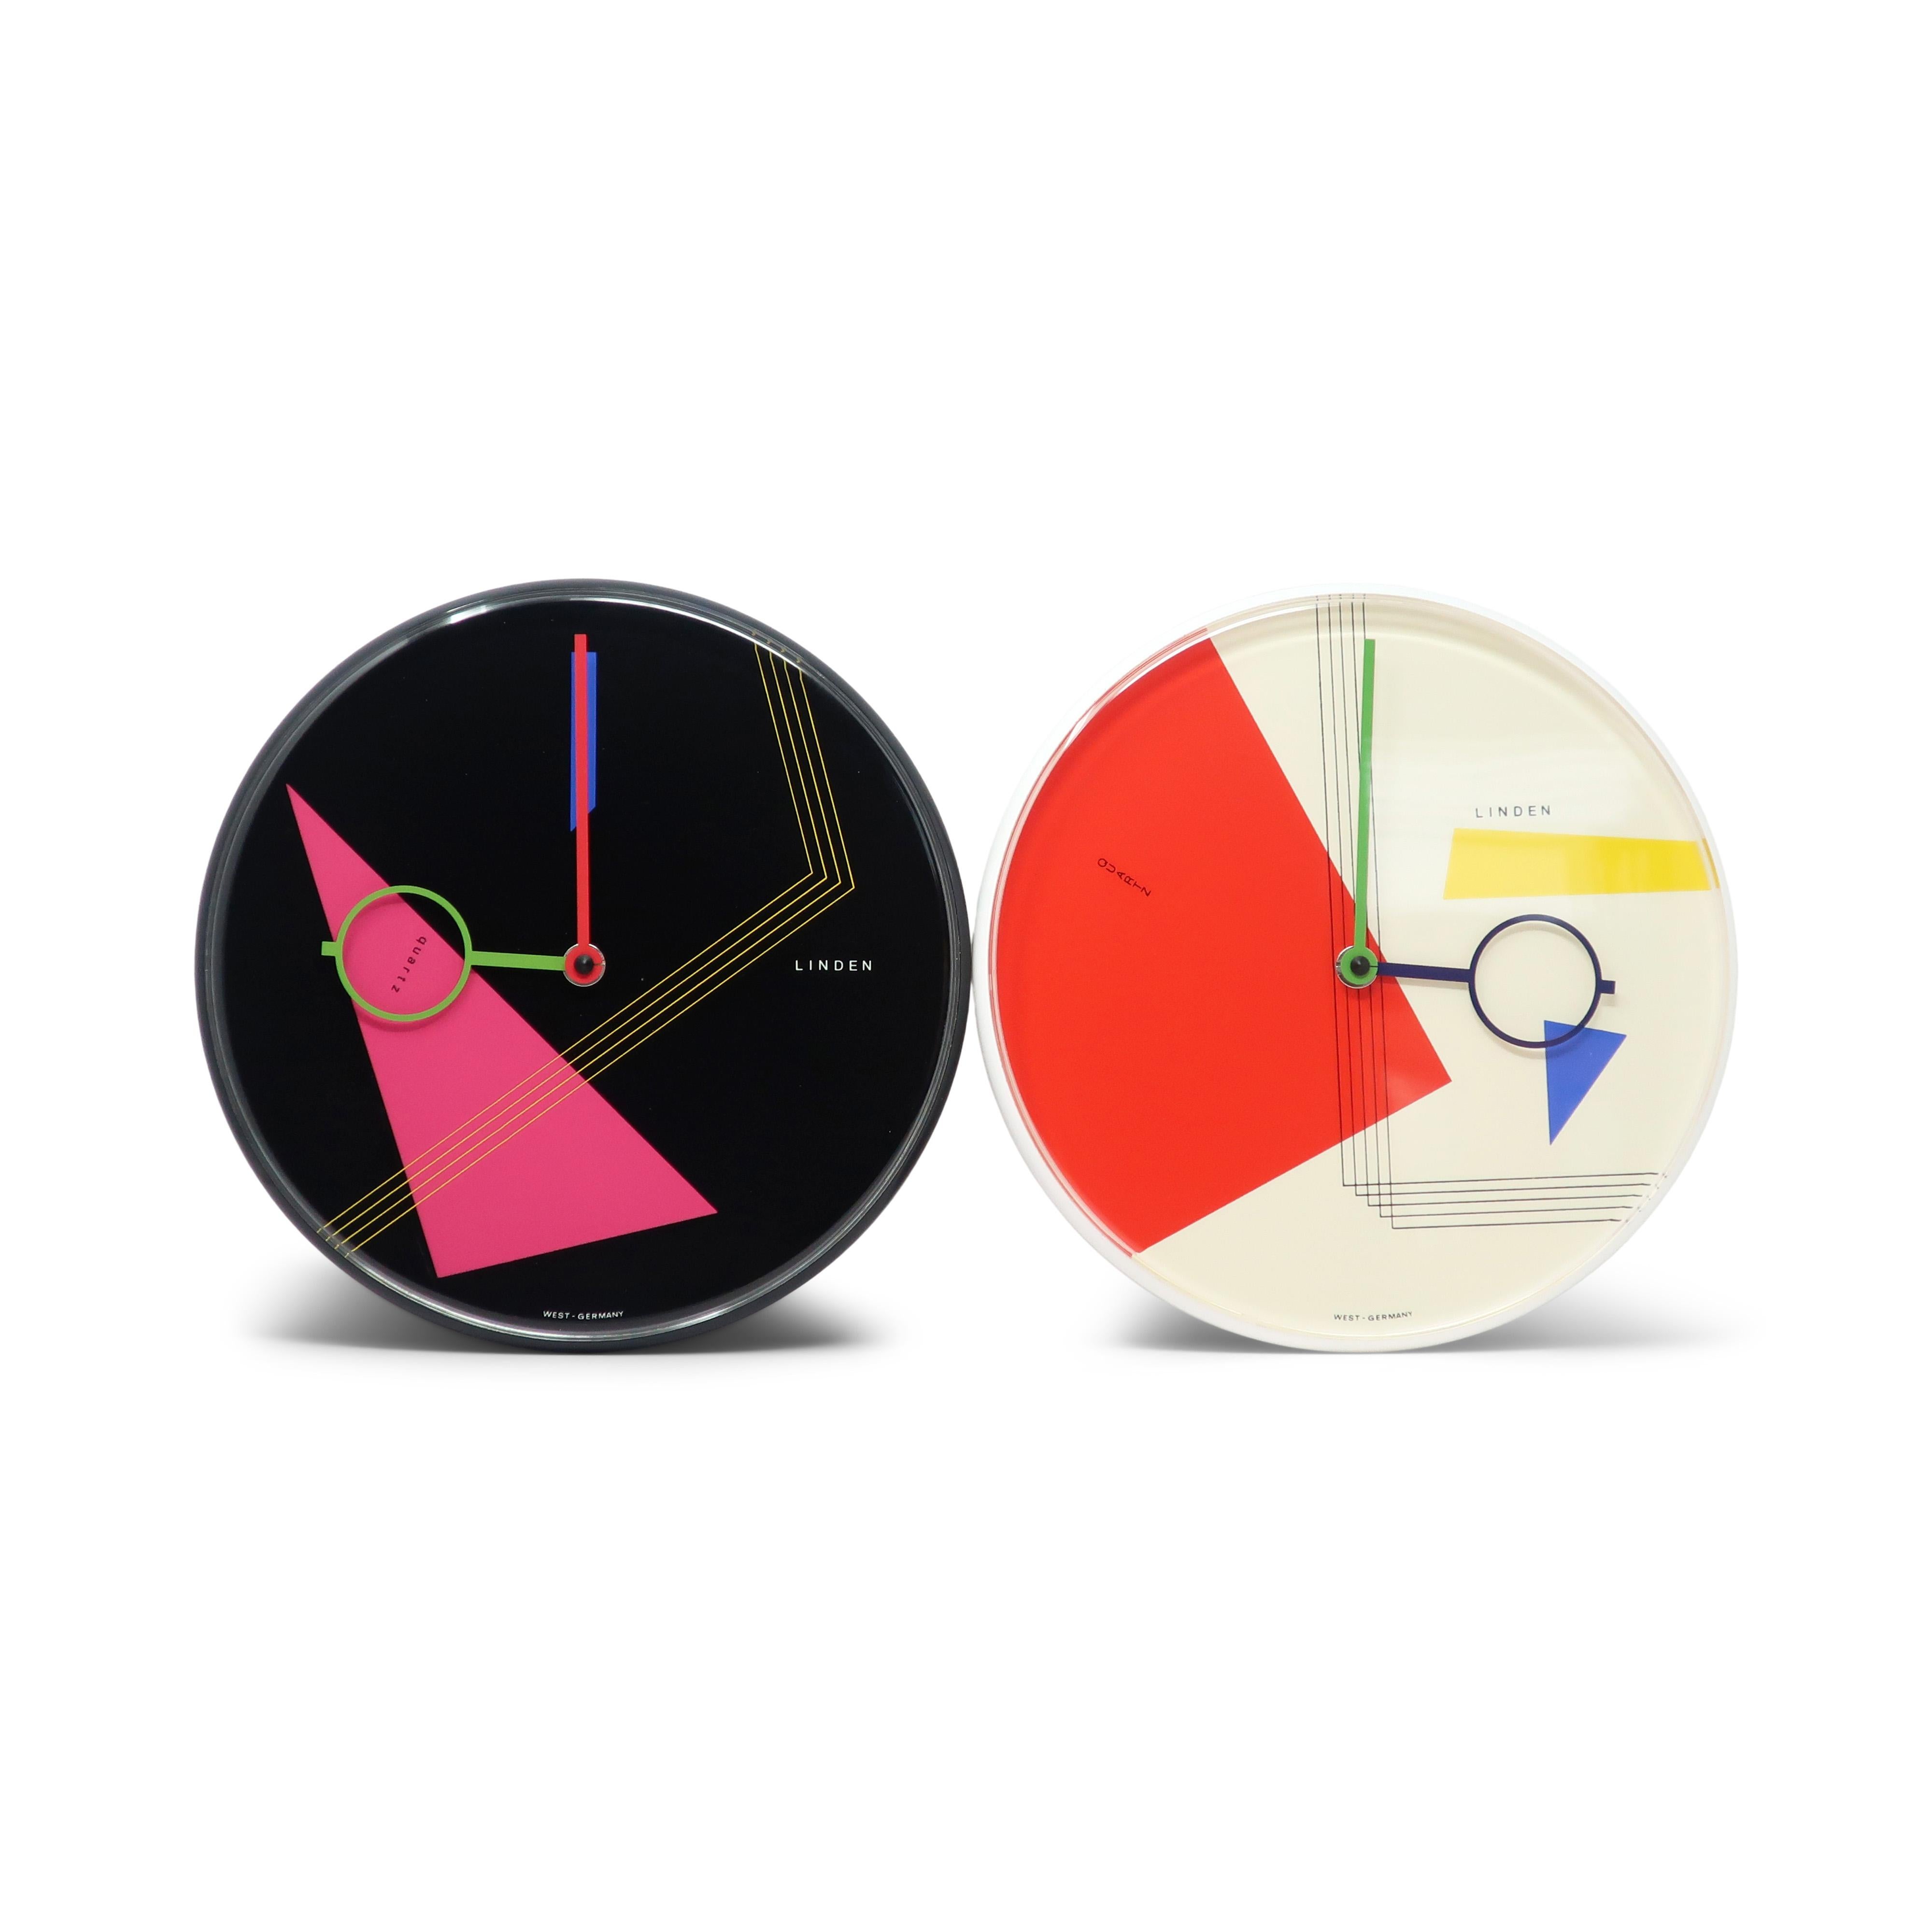 A beautiful postmodern wall clock from the 1980s by West German clockmaker Linden.  It has a white case, white face with geometric accents, and black and green hands,  Striking contrast and fantastic pop of colors with blue, red, black and yellow